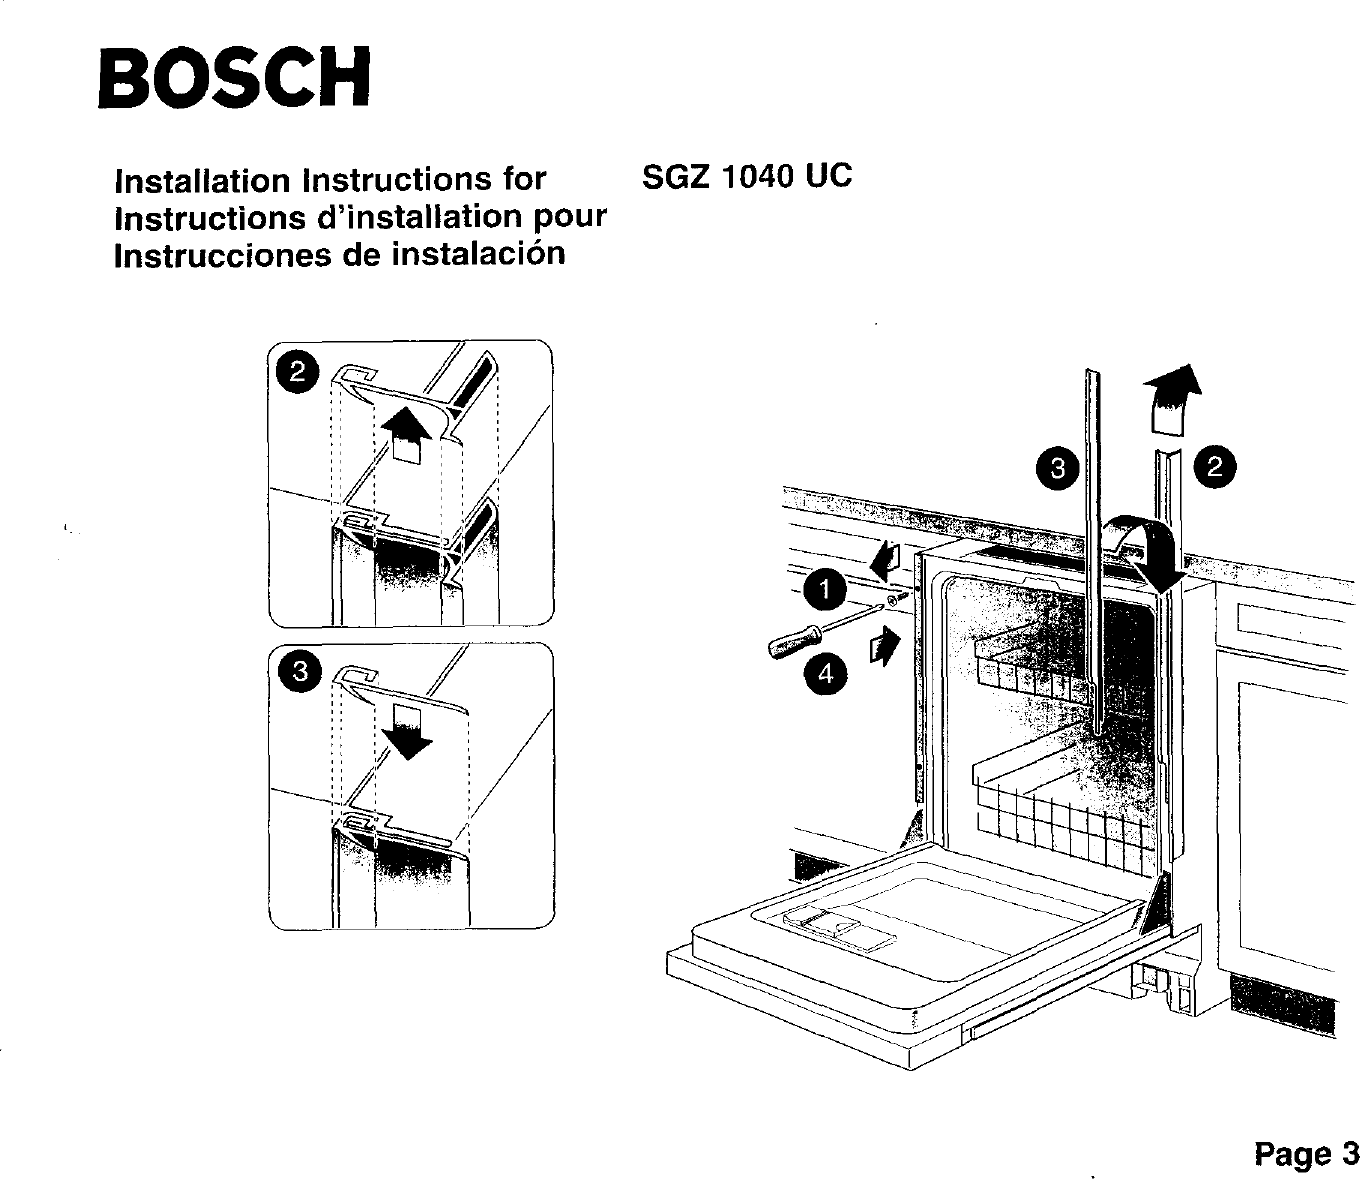 Page 3 of 4 - BOSCH  Dishwasher Manual L0020047